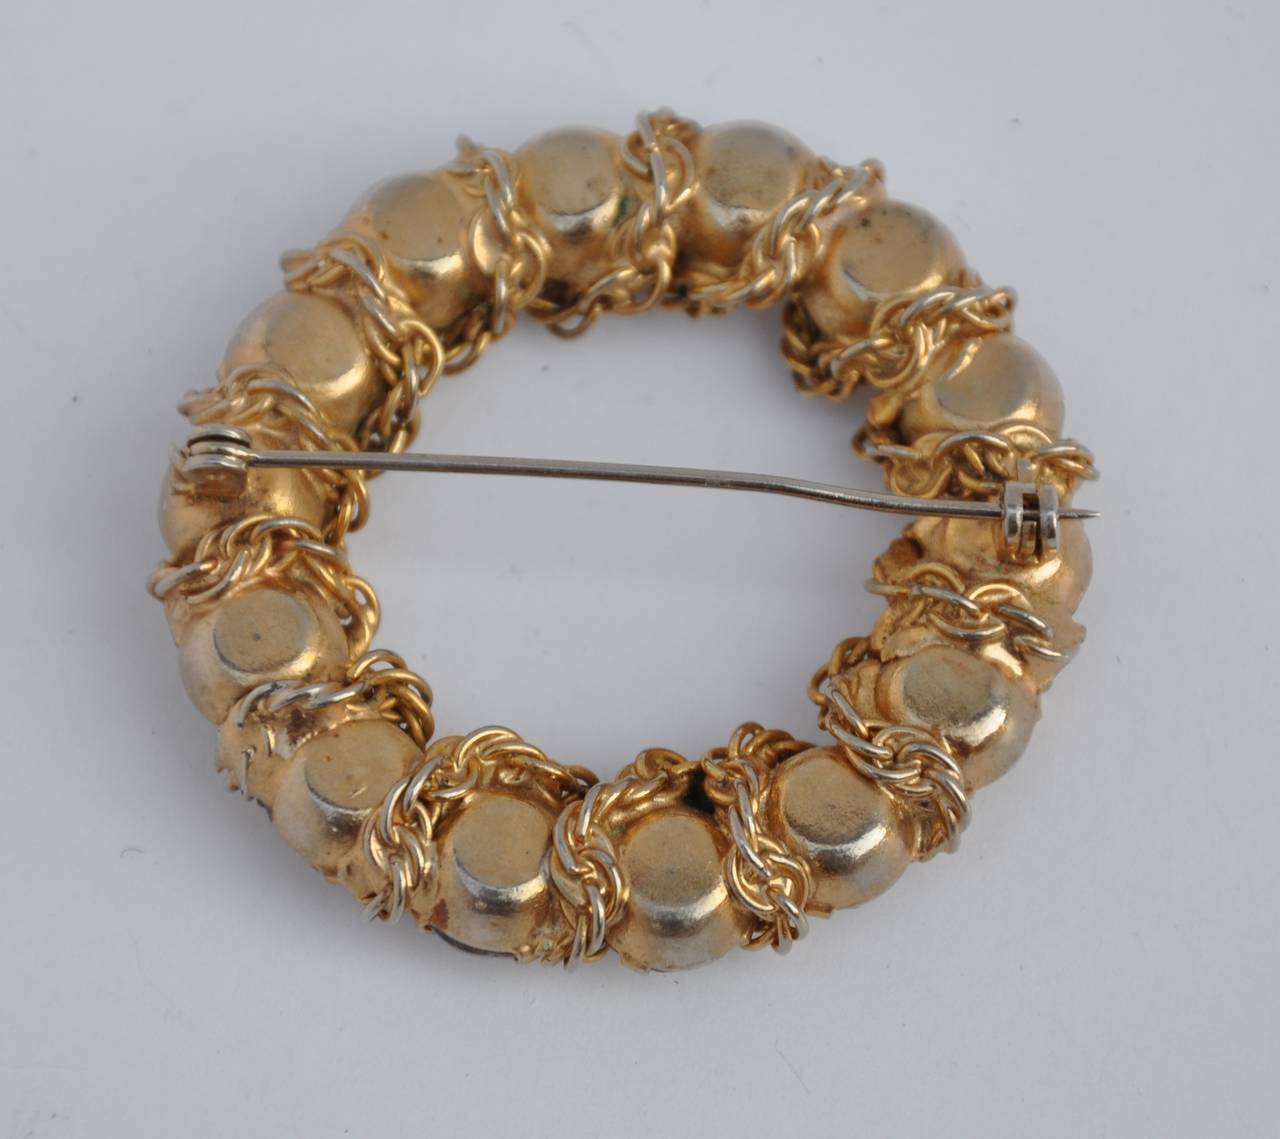 Bold gilded gold "Chain-Link" hardware brooch is accented with rhinestones. This large circular brooch measures 1 7/8" in circumference, width and depth measures 1/2".